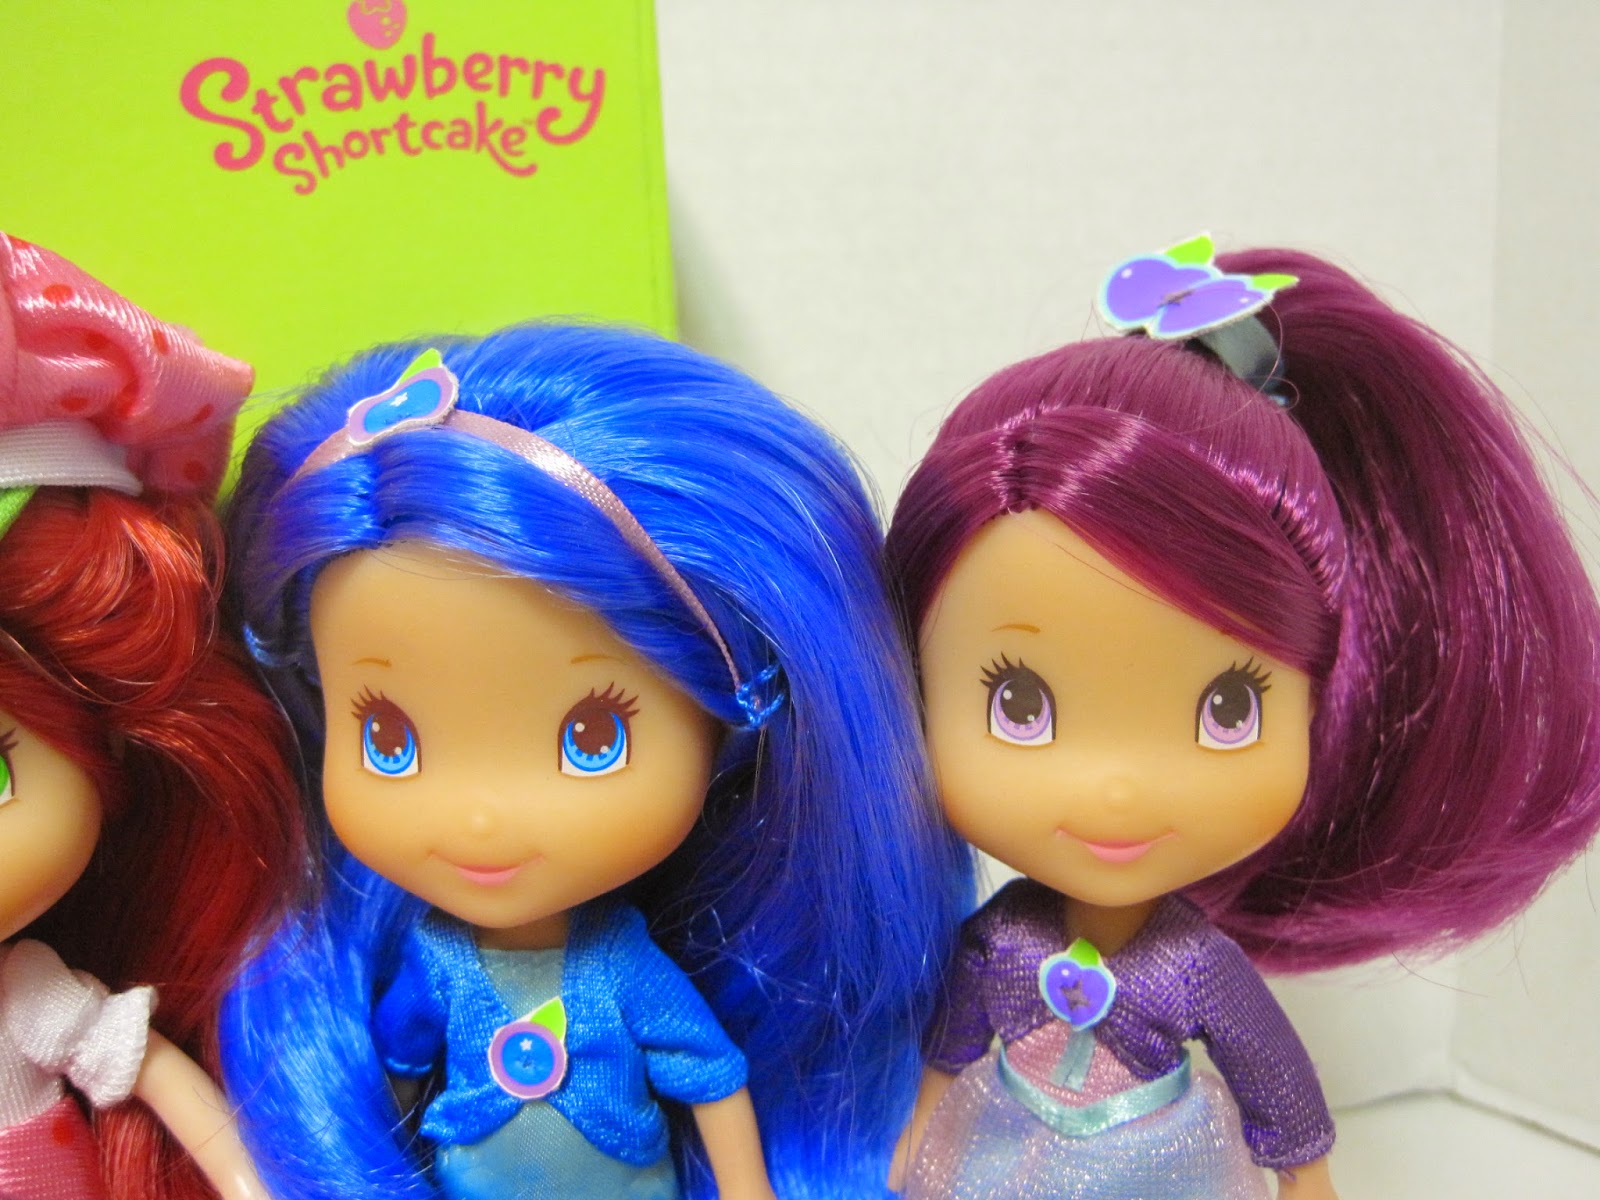 Strawberry Shortcake Blueberry Muffin Doll with Blueberry Scented Hair - wide 2